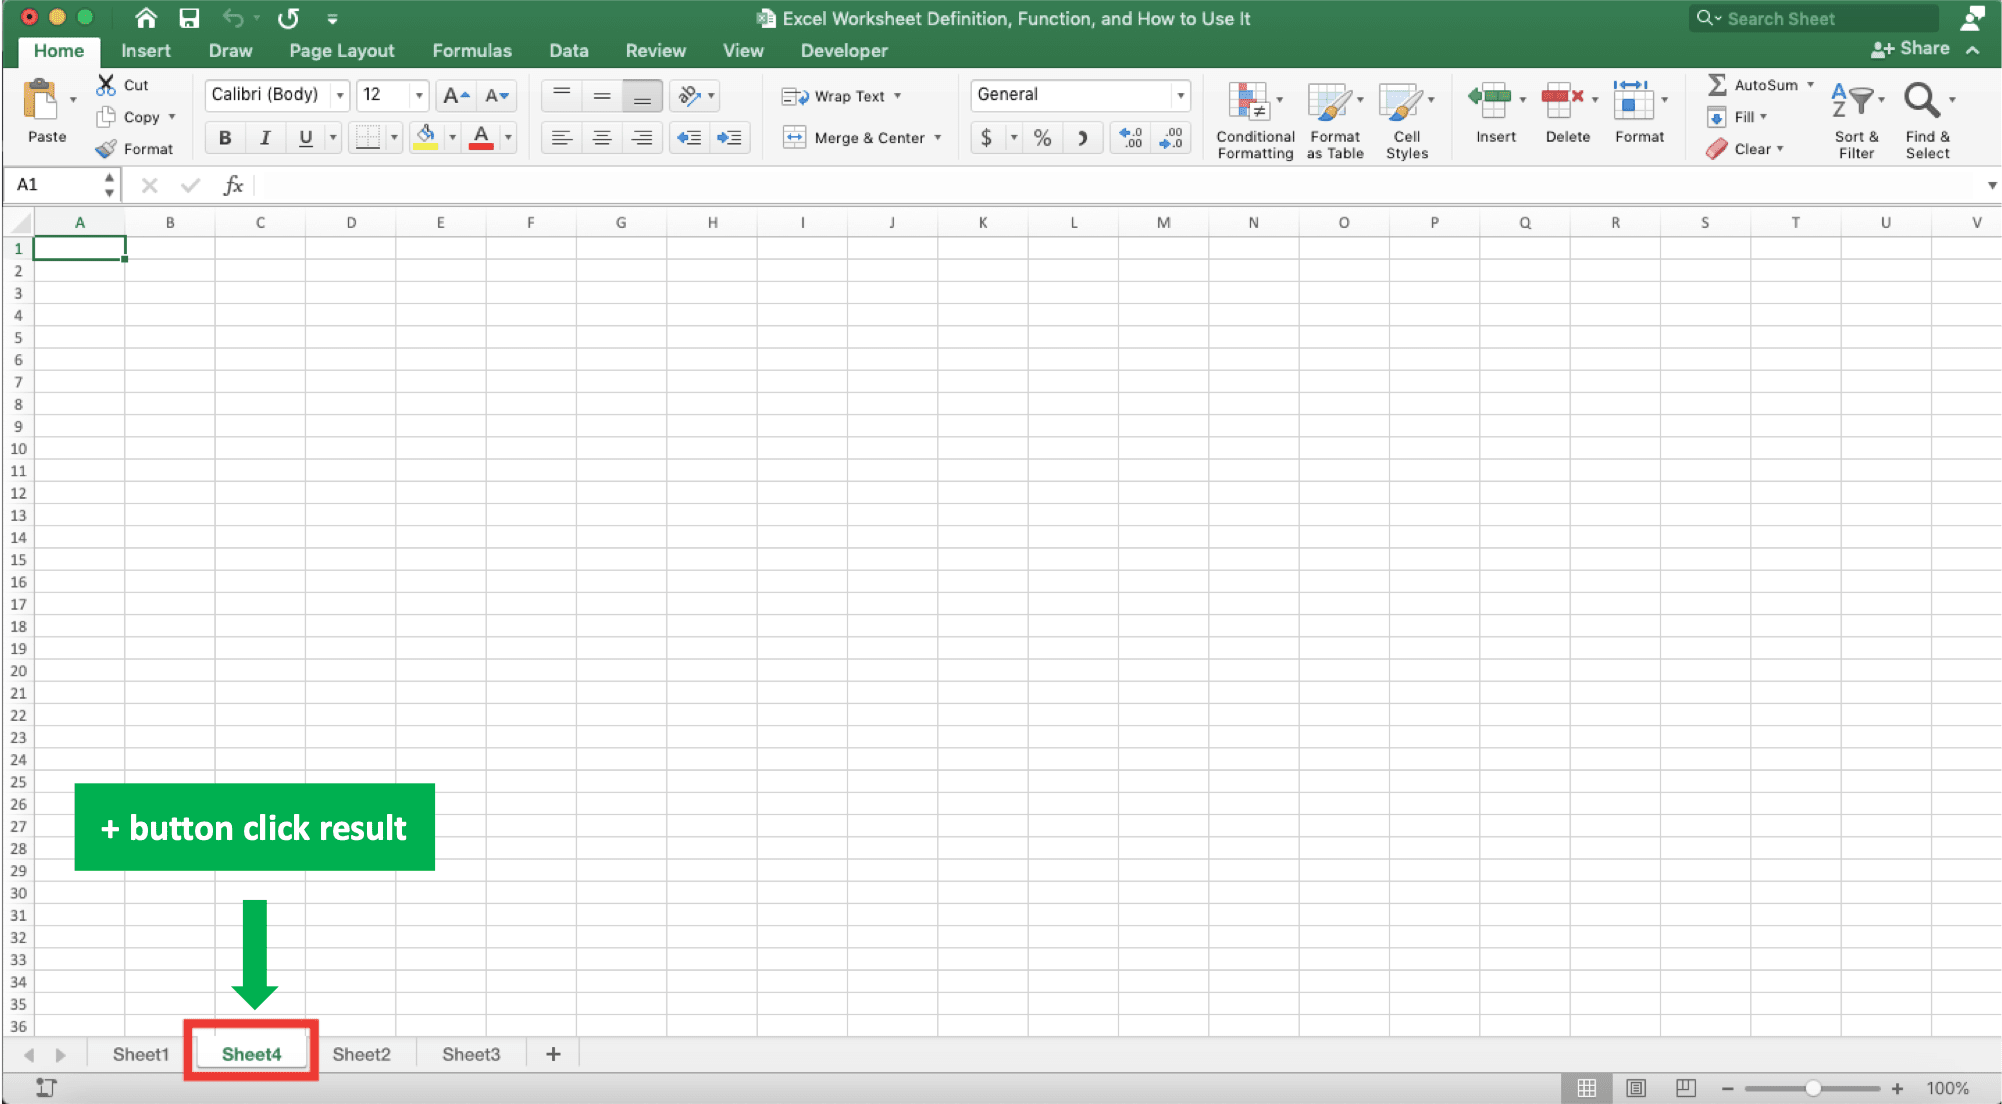 Excel Worksheet Definition, Function, and How to Use It - Screenshot of the Result Example for Adding a Sheet in Excel